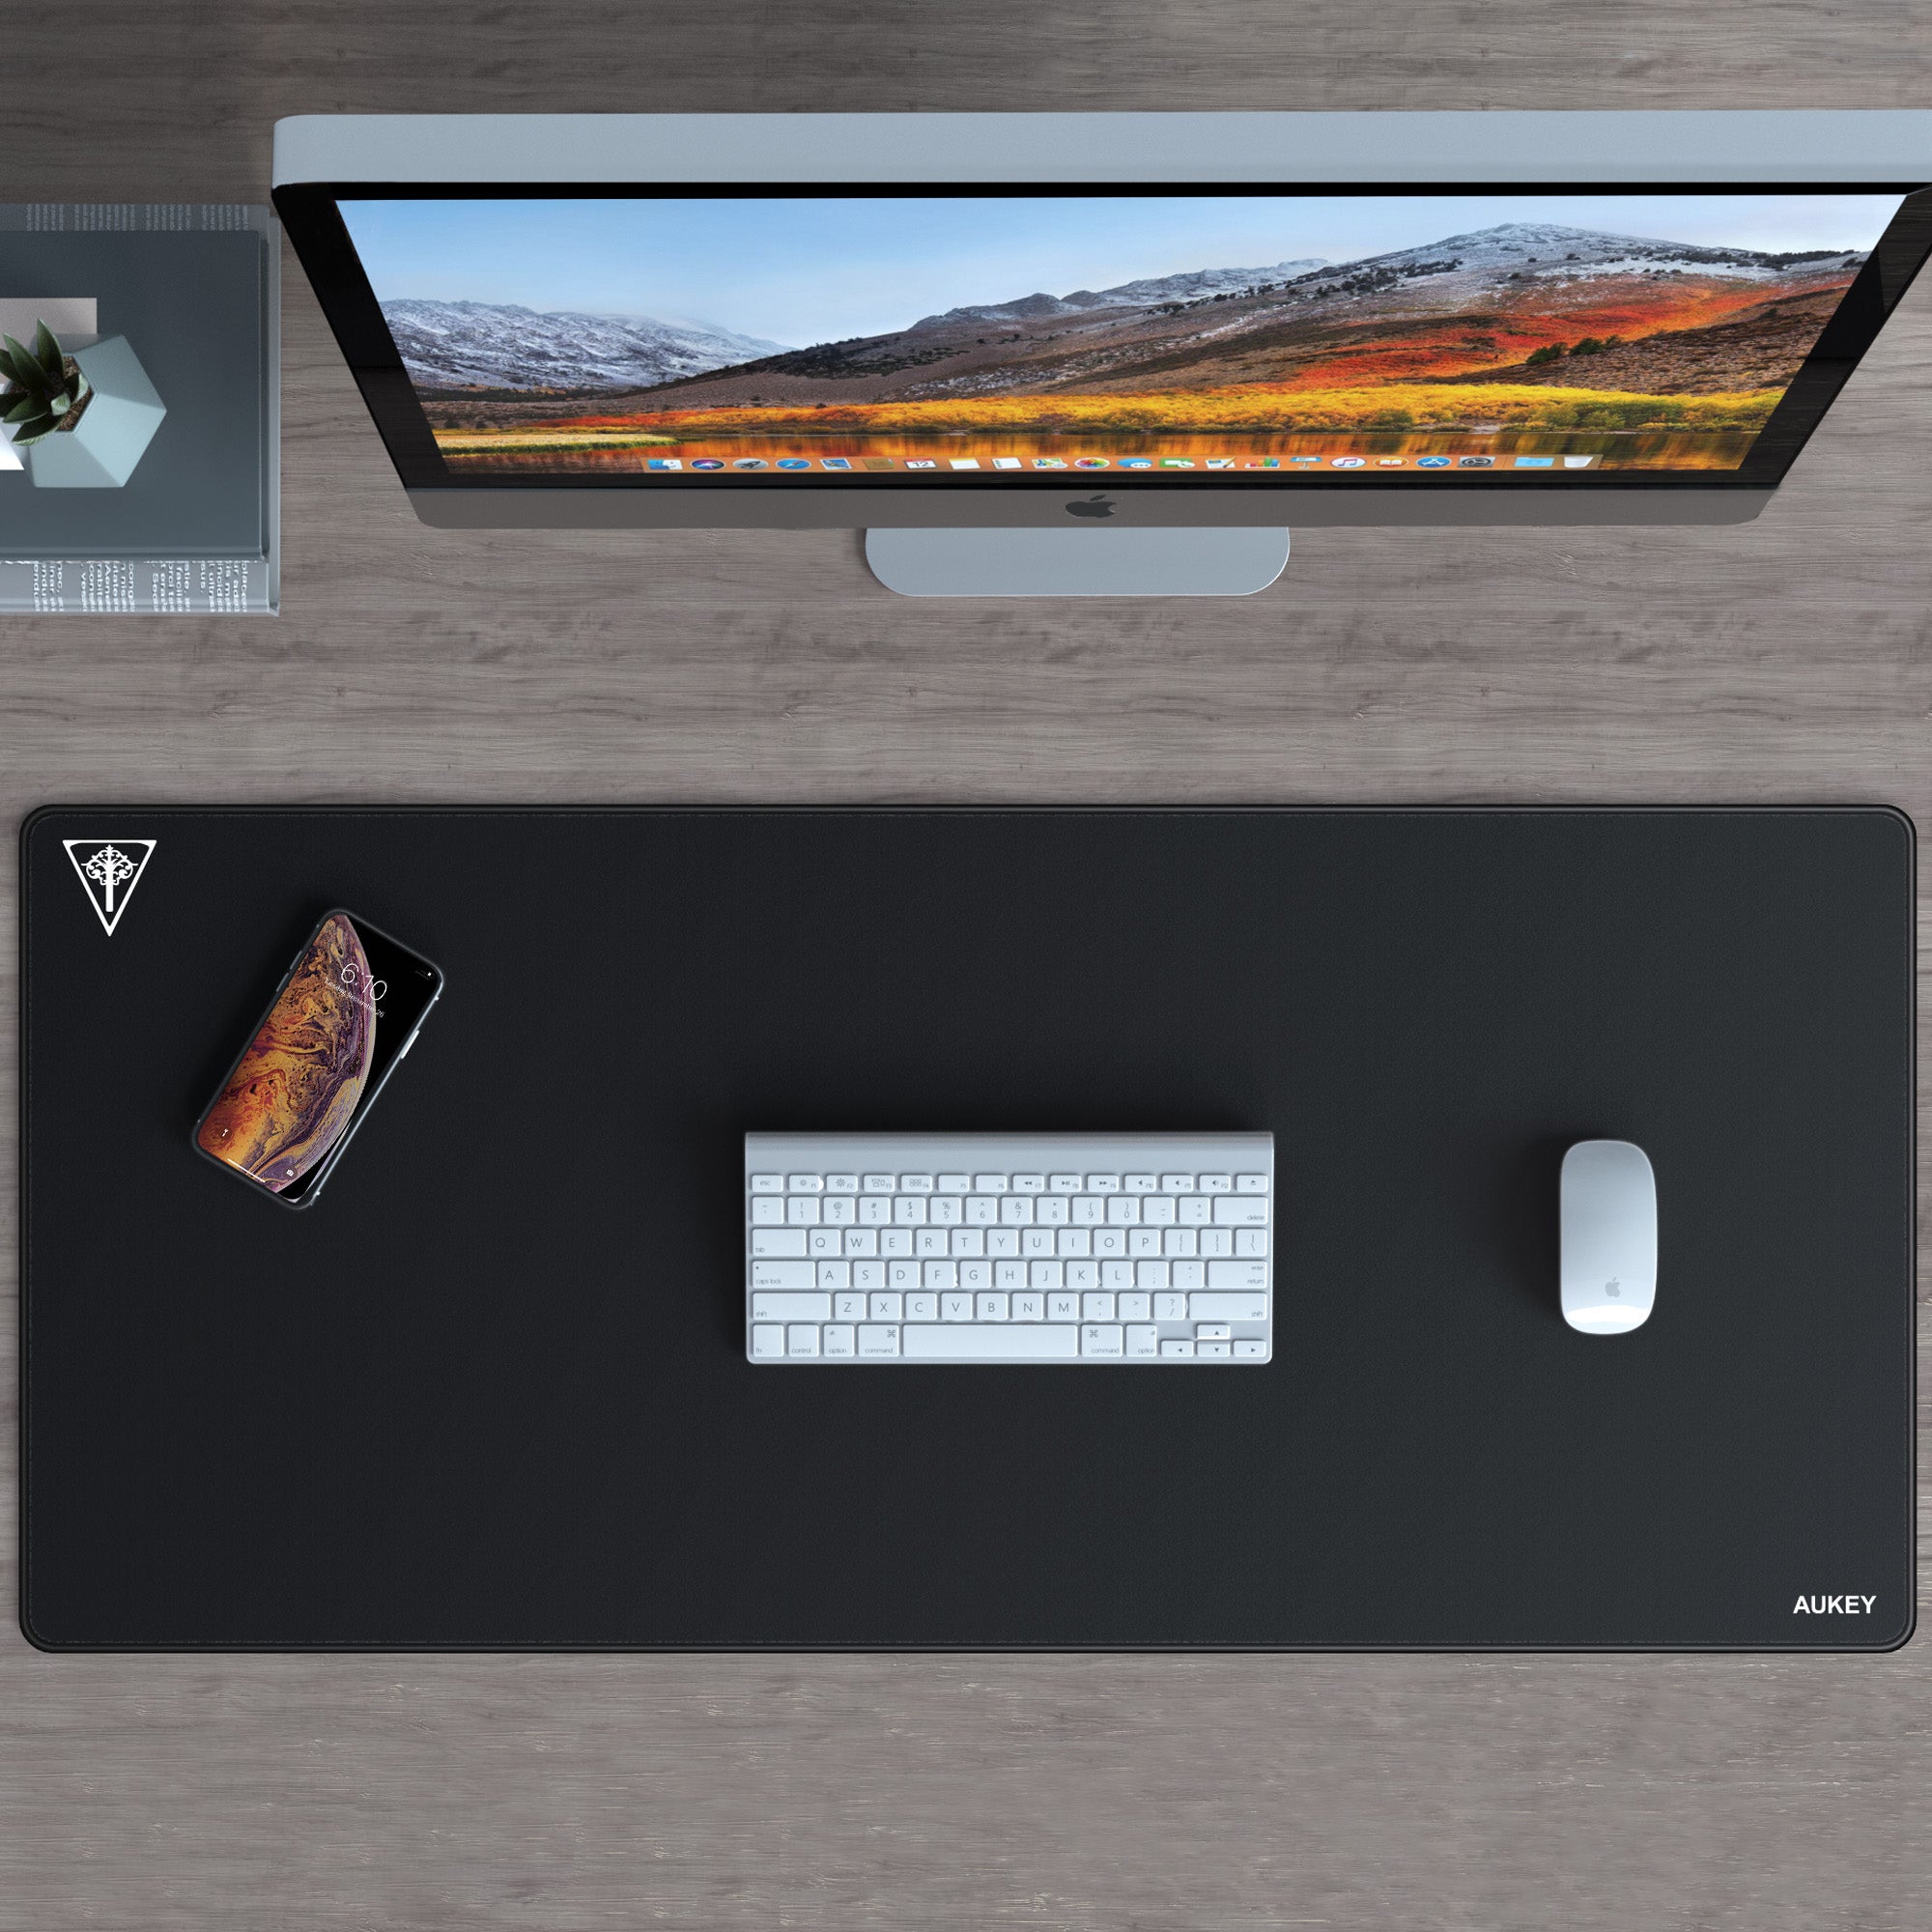 KM-P3 Extended XXL Mouse Mat